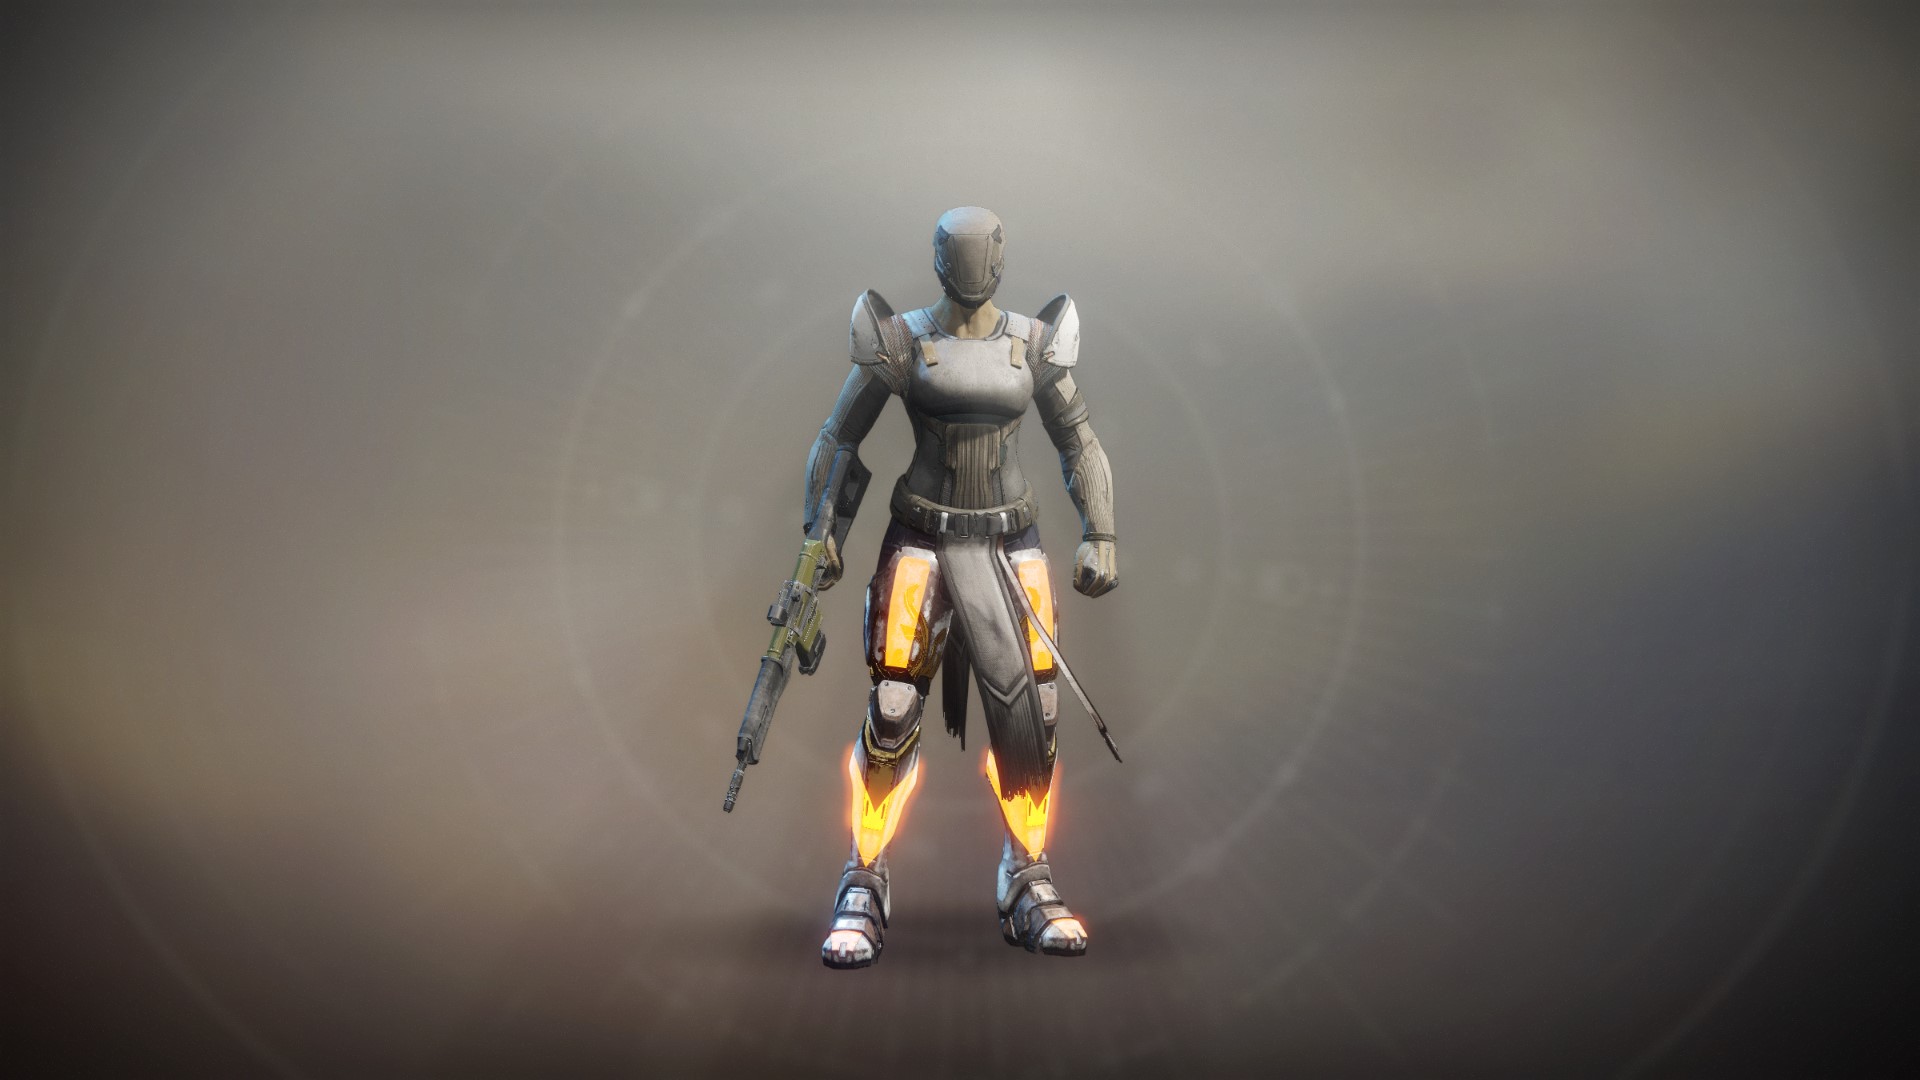 An in-game render of the Sunlit Leg Glow.